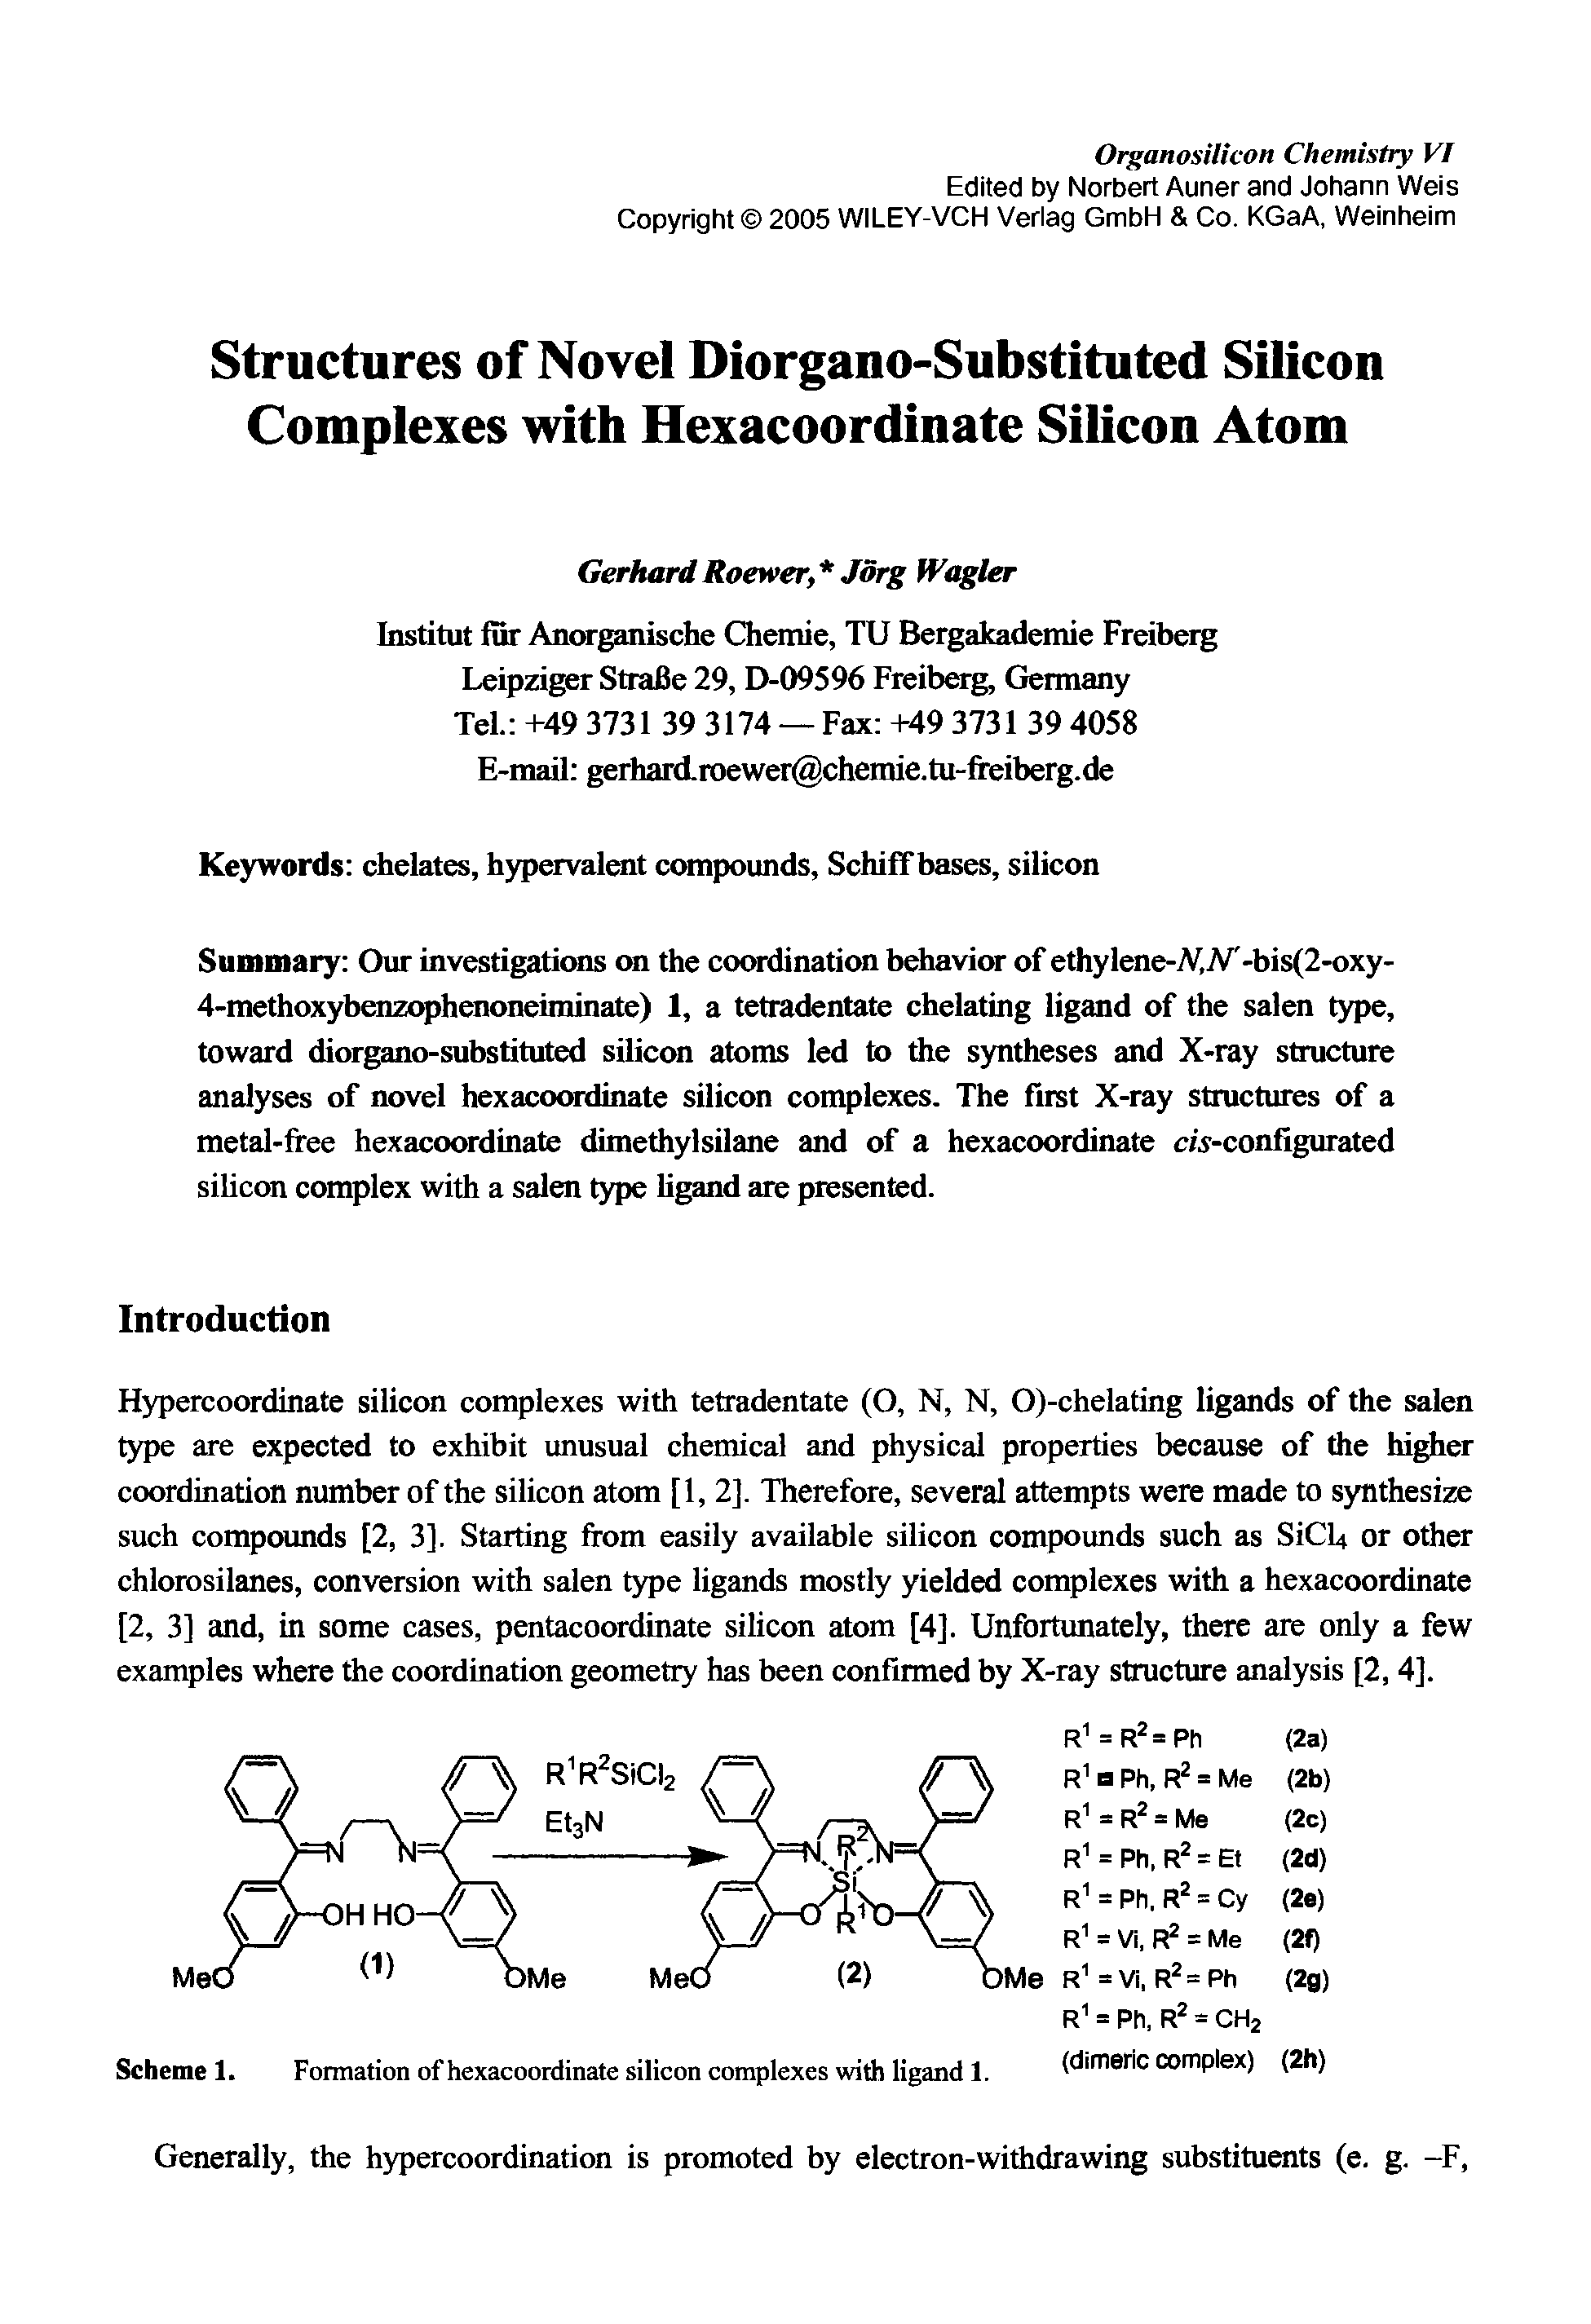 Scheme 1. Formation of hexacoordinate silicon complexes with ligand 1. (dimeric complex) (2h)...